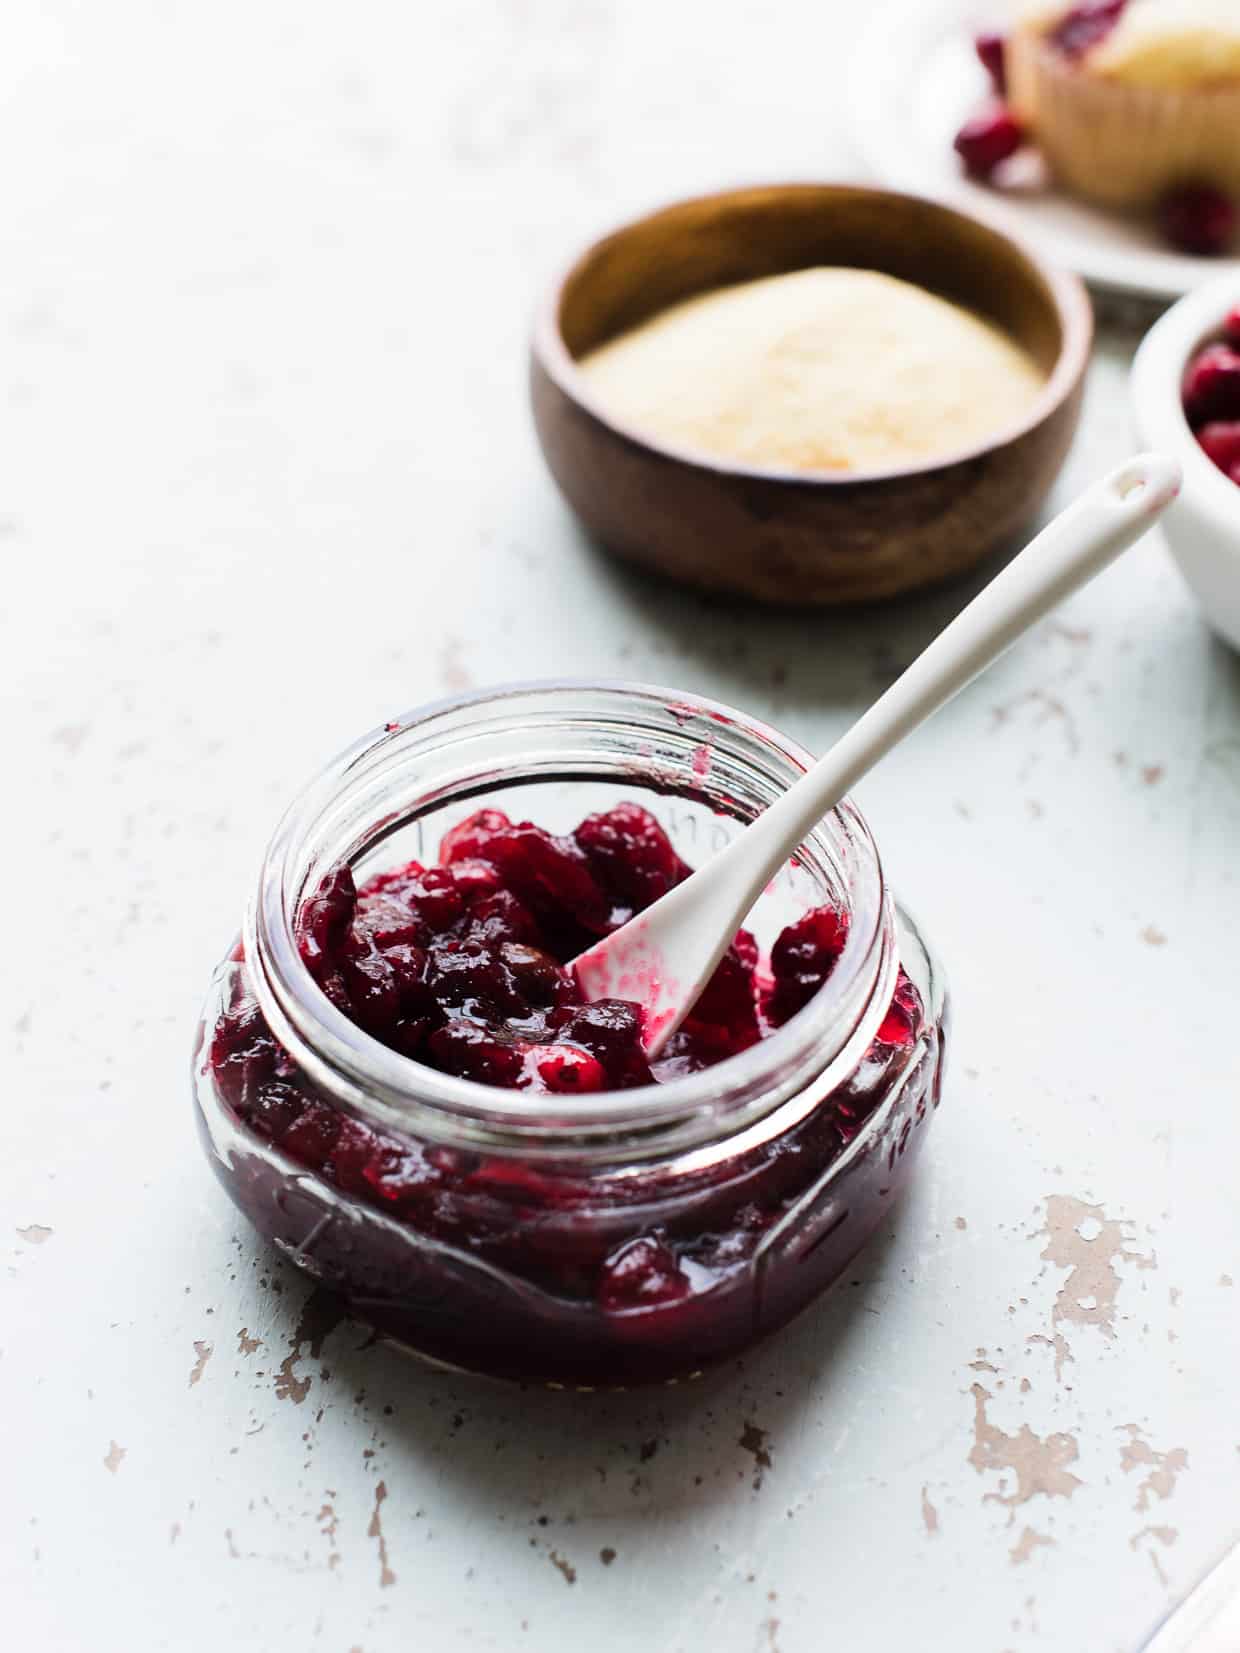 Glass jar of cranberry sauce on a rustic counter top.